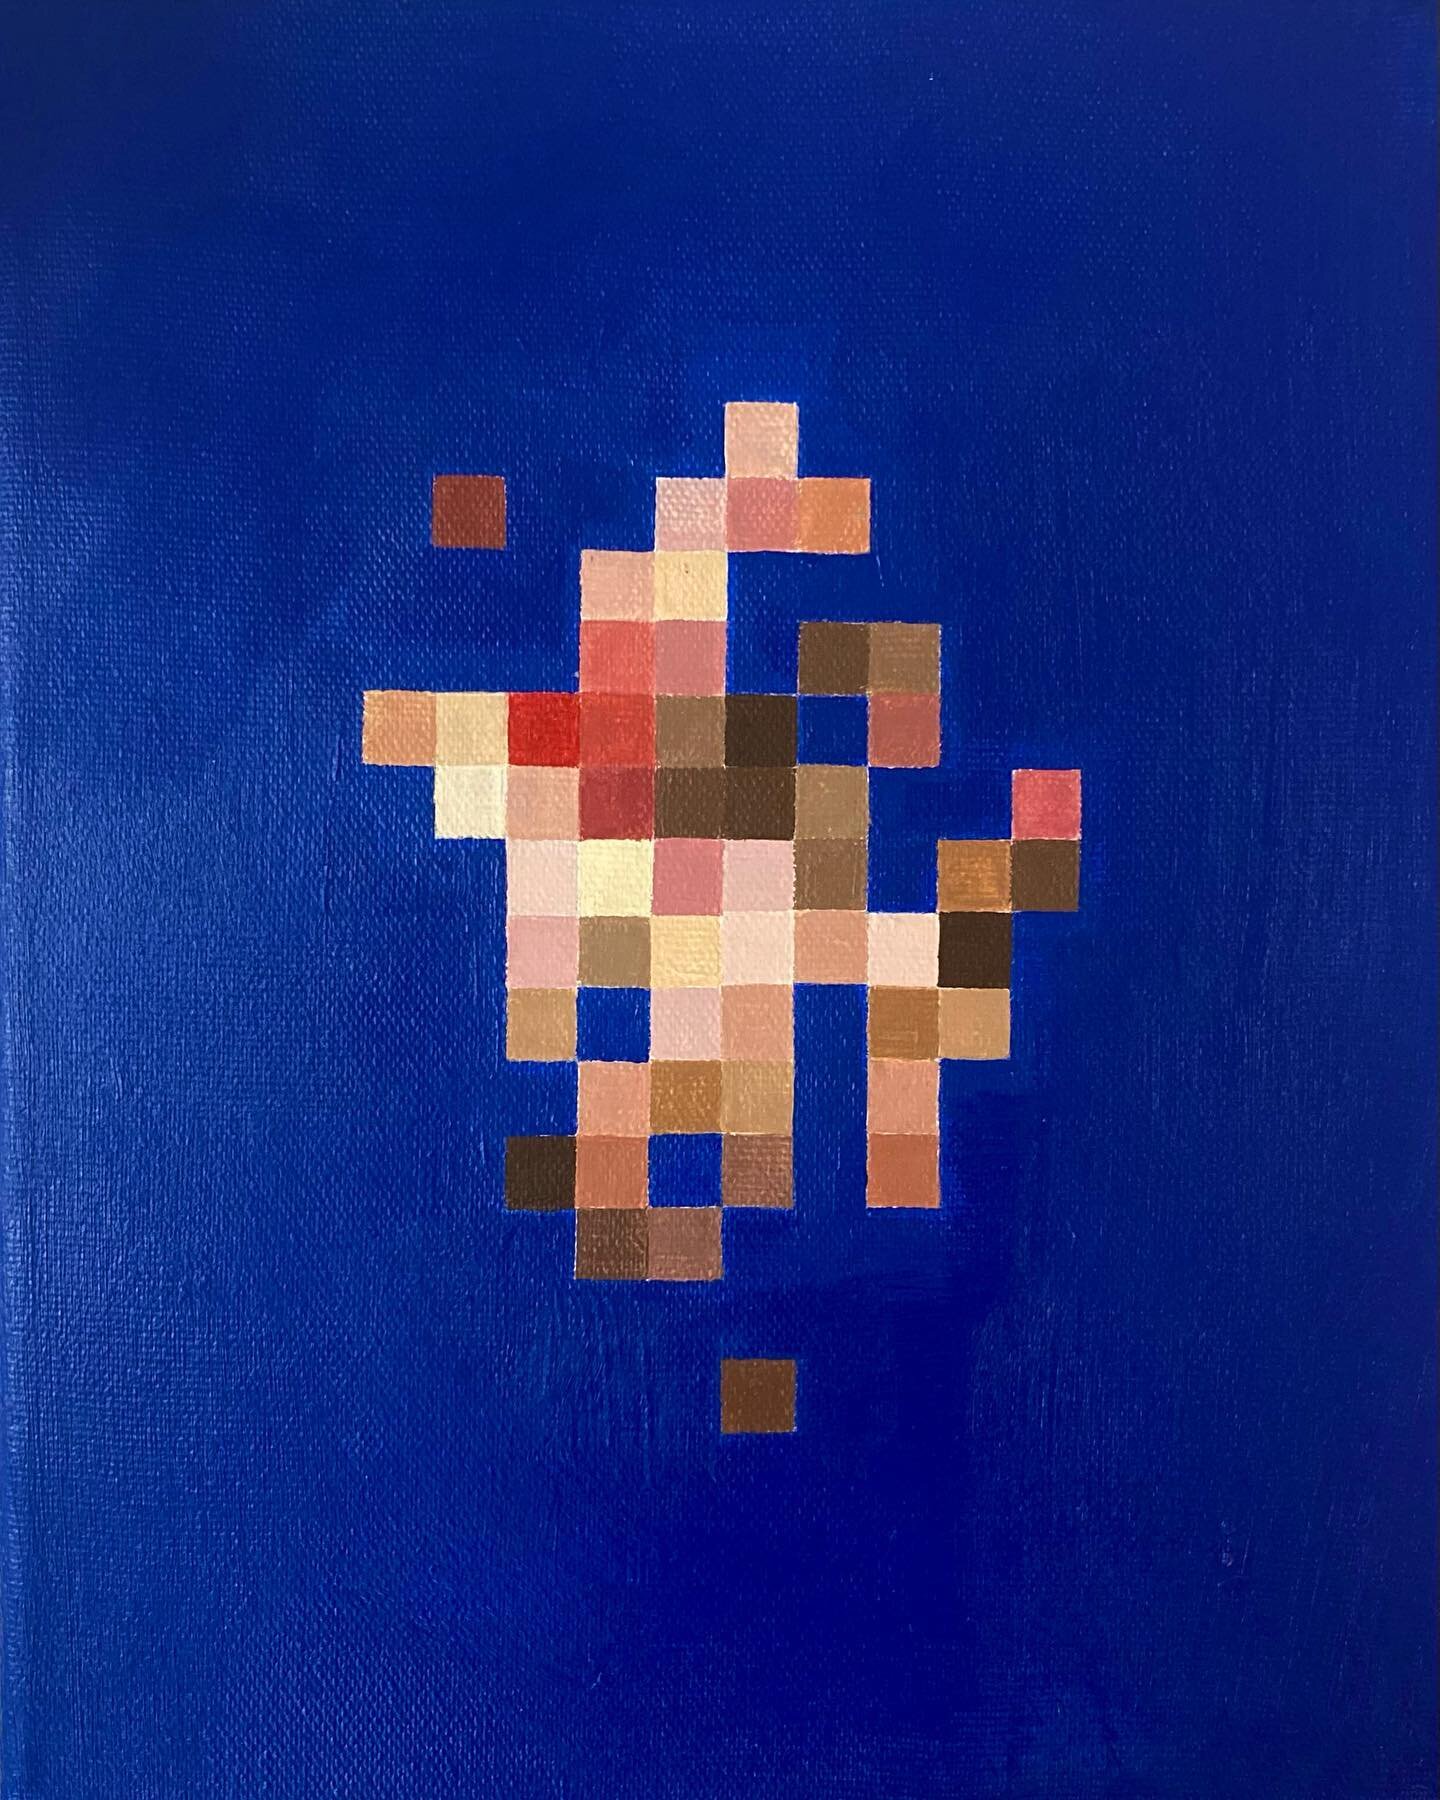 I made this mini painting recently. It&rsquo;s the first time I do an abstract pixelated piece like this&hellip; it was a little tricky to make and photograph (colours aren&rsquo;t exact) but I&rsquo;m happy with how it turned out.

I&rsquo;m curious